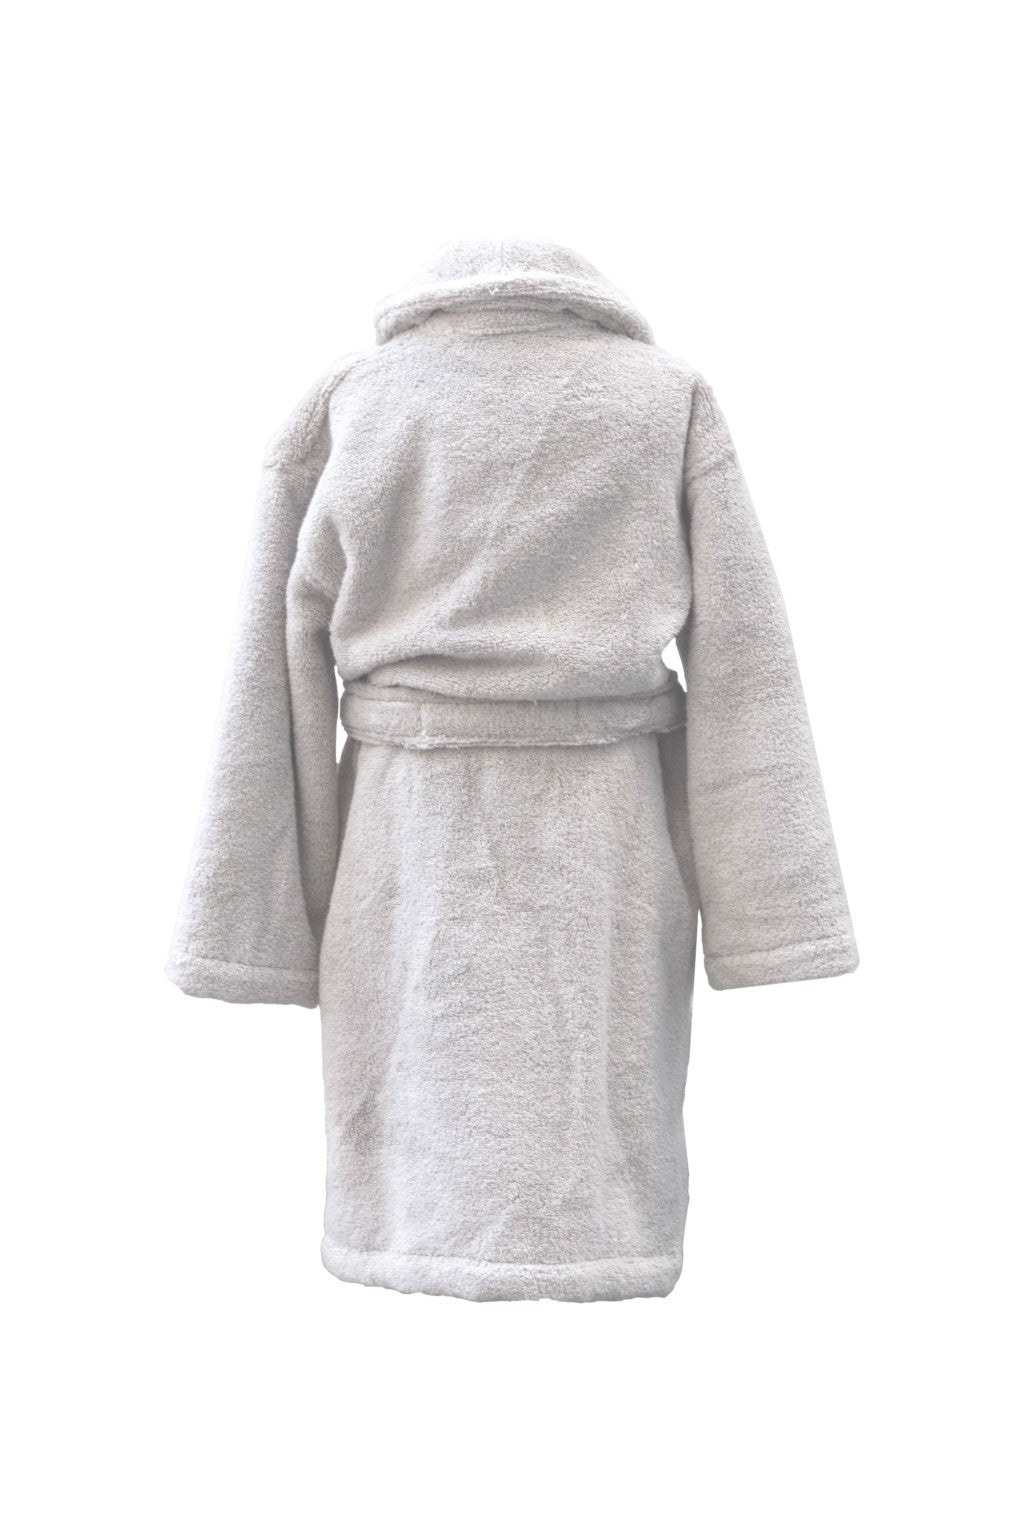 Luin Living Bathrobe for the Whole Family, 8 different sizes, Pearl Grey